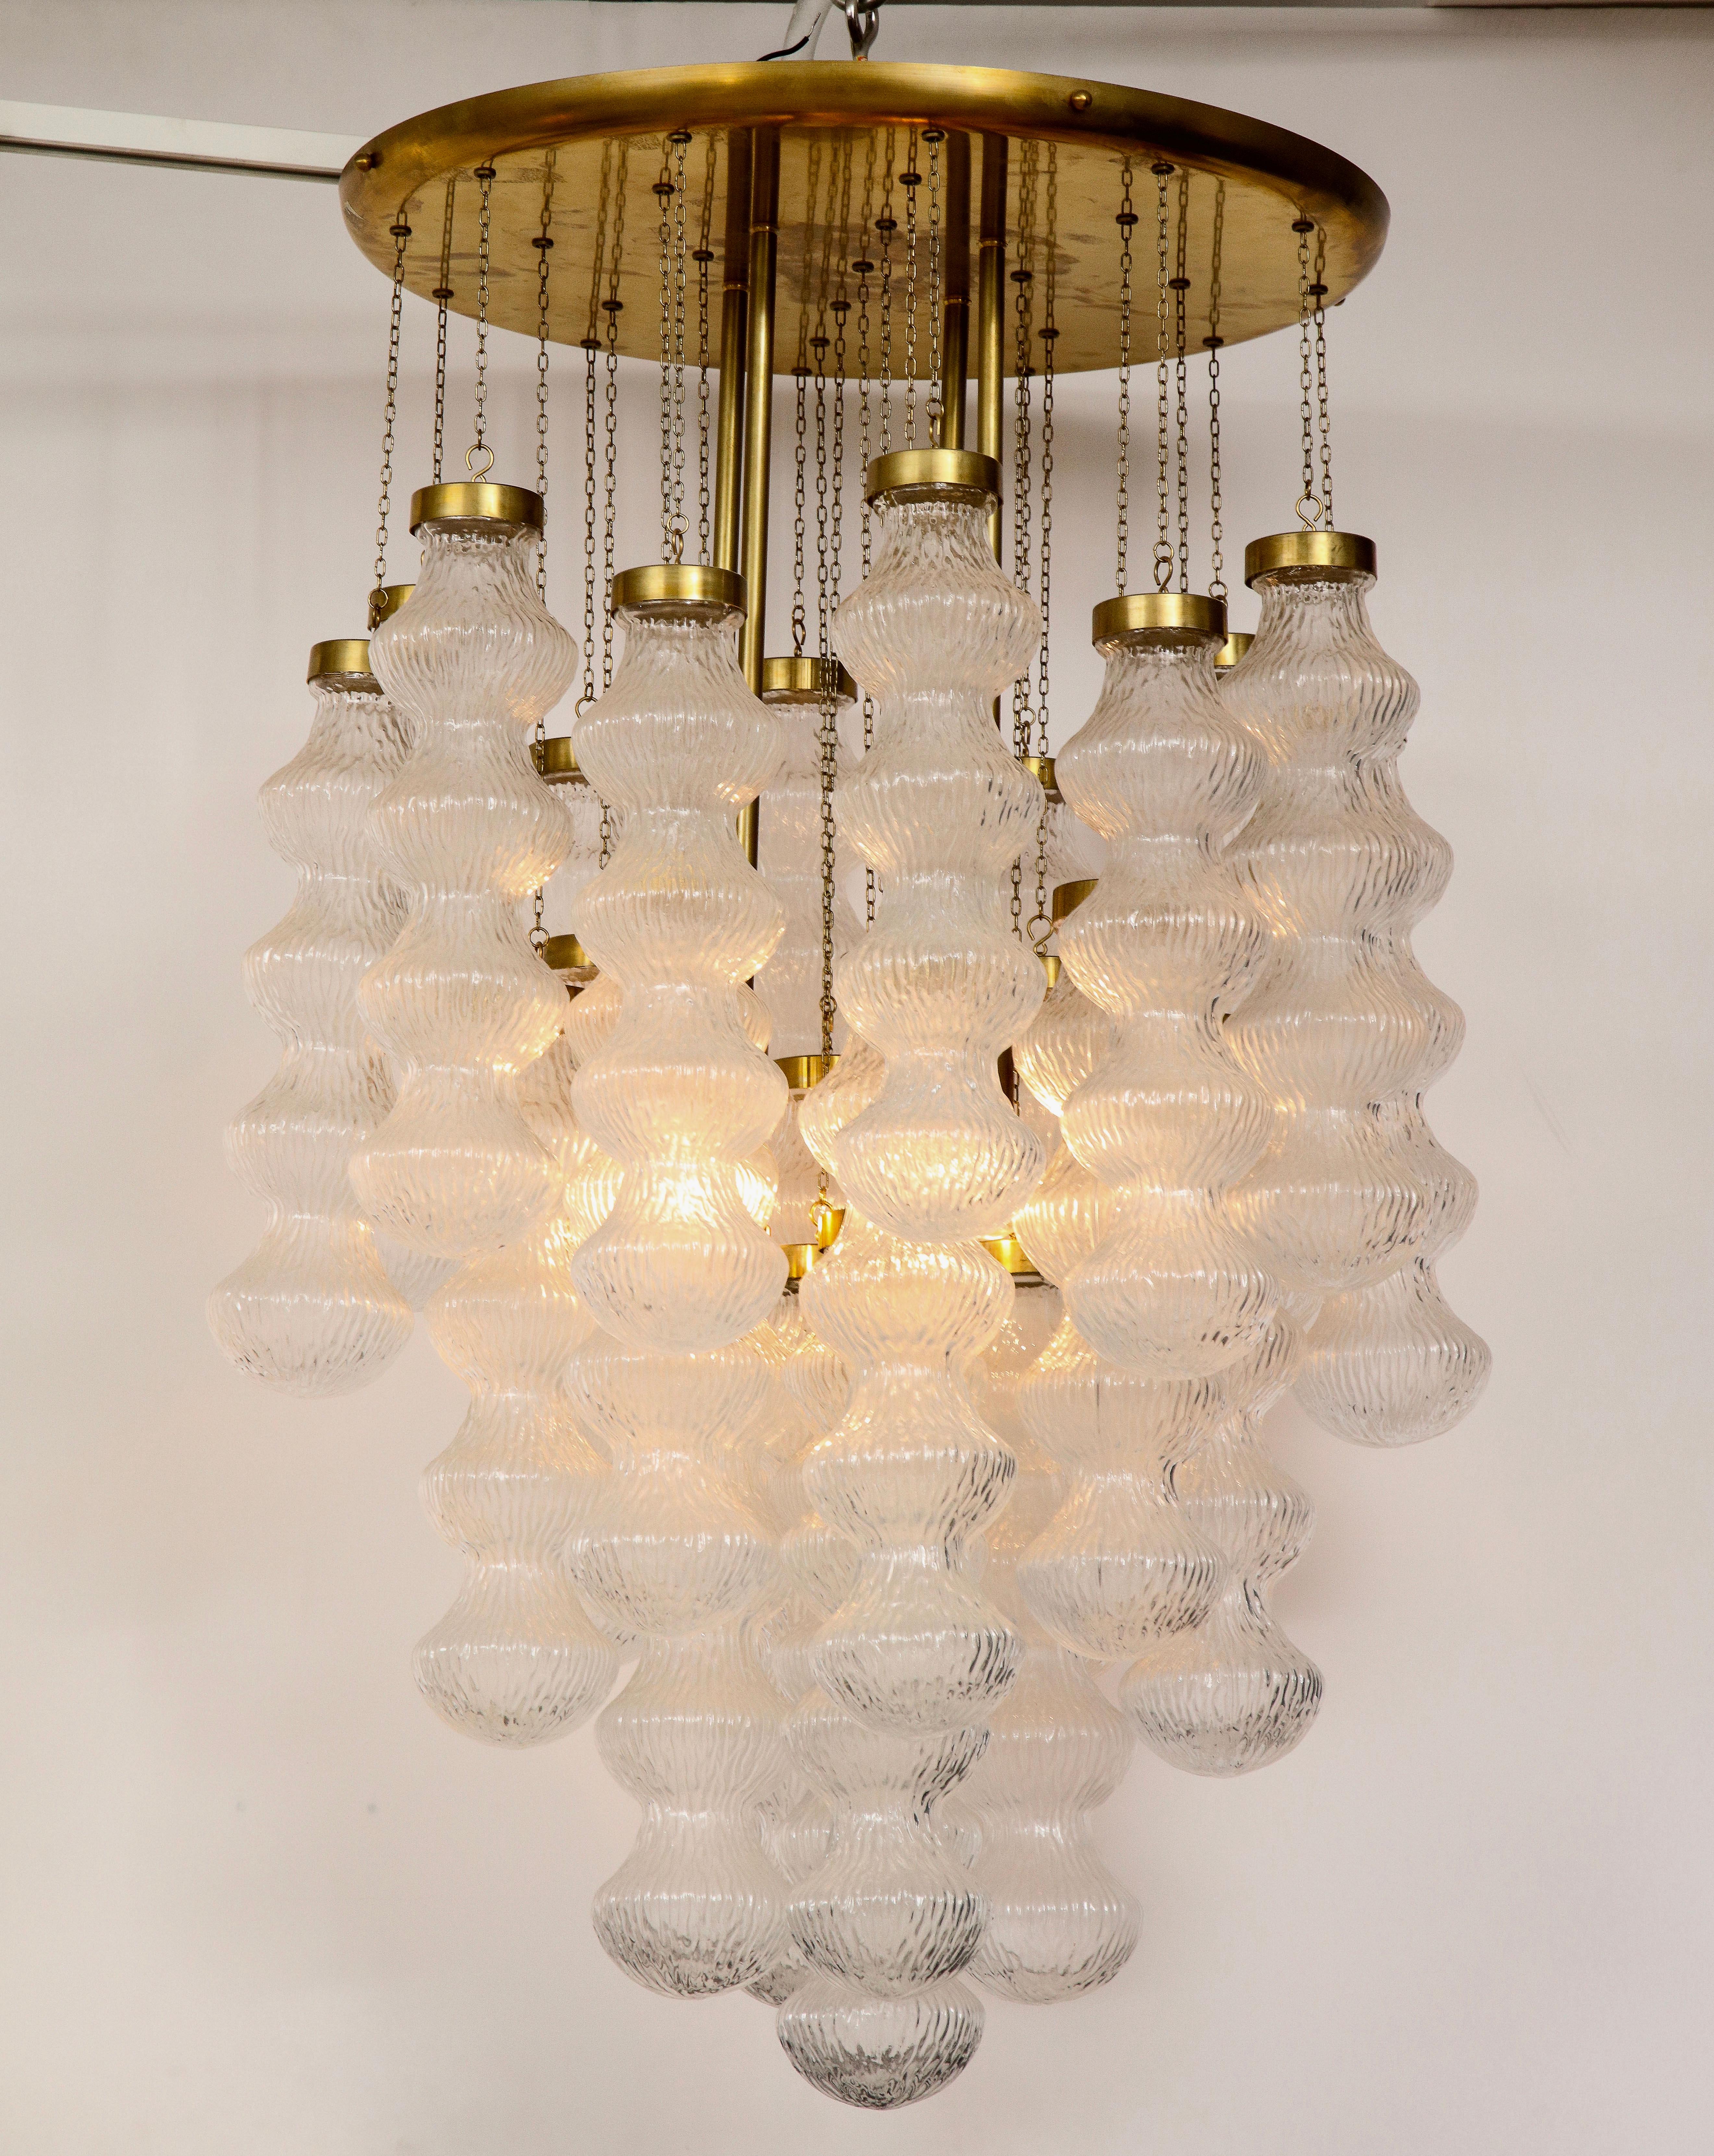 Italian Mid-Century Cenedese Murano Glass and Brass Flush Mount Chandelier For Sale 2